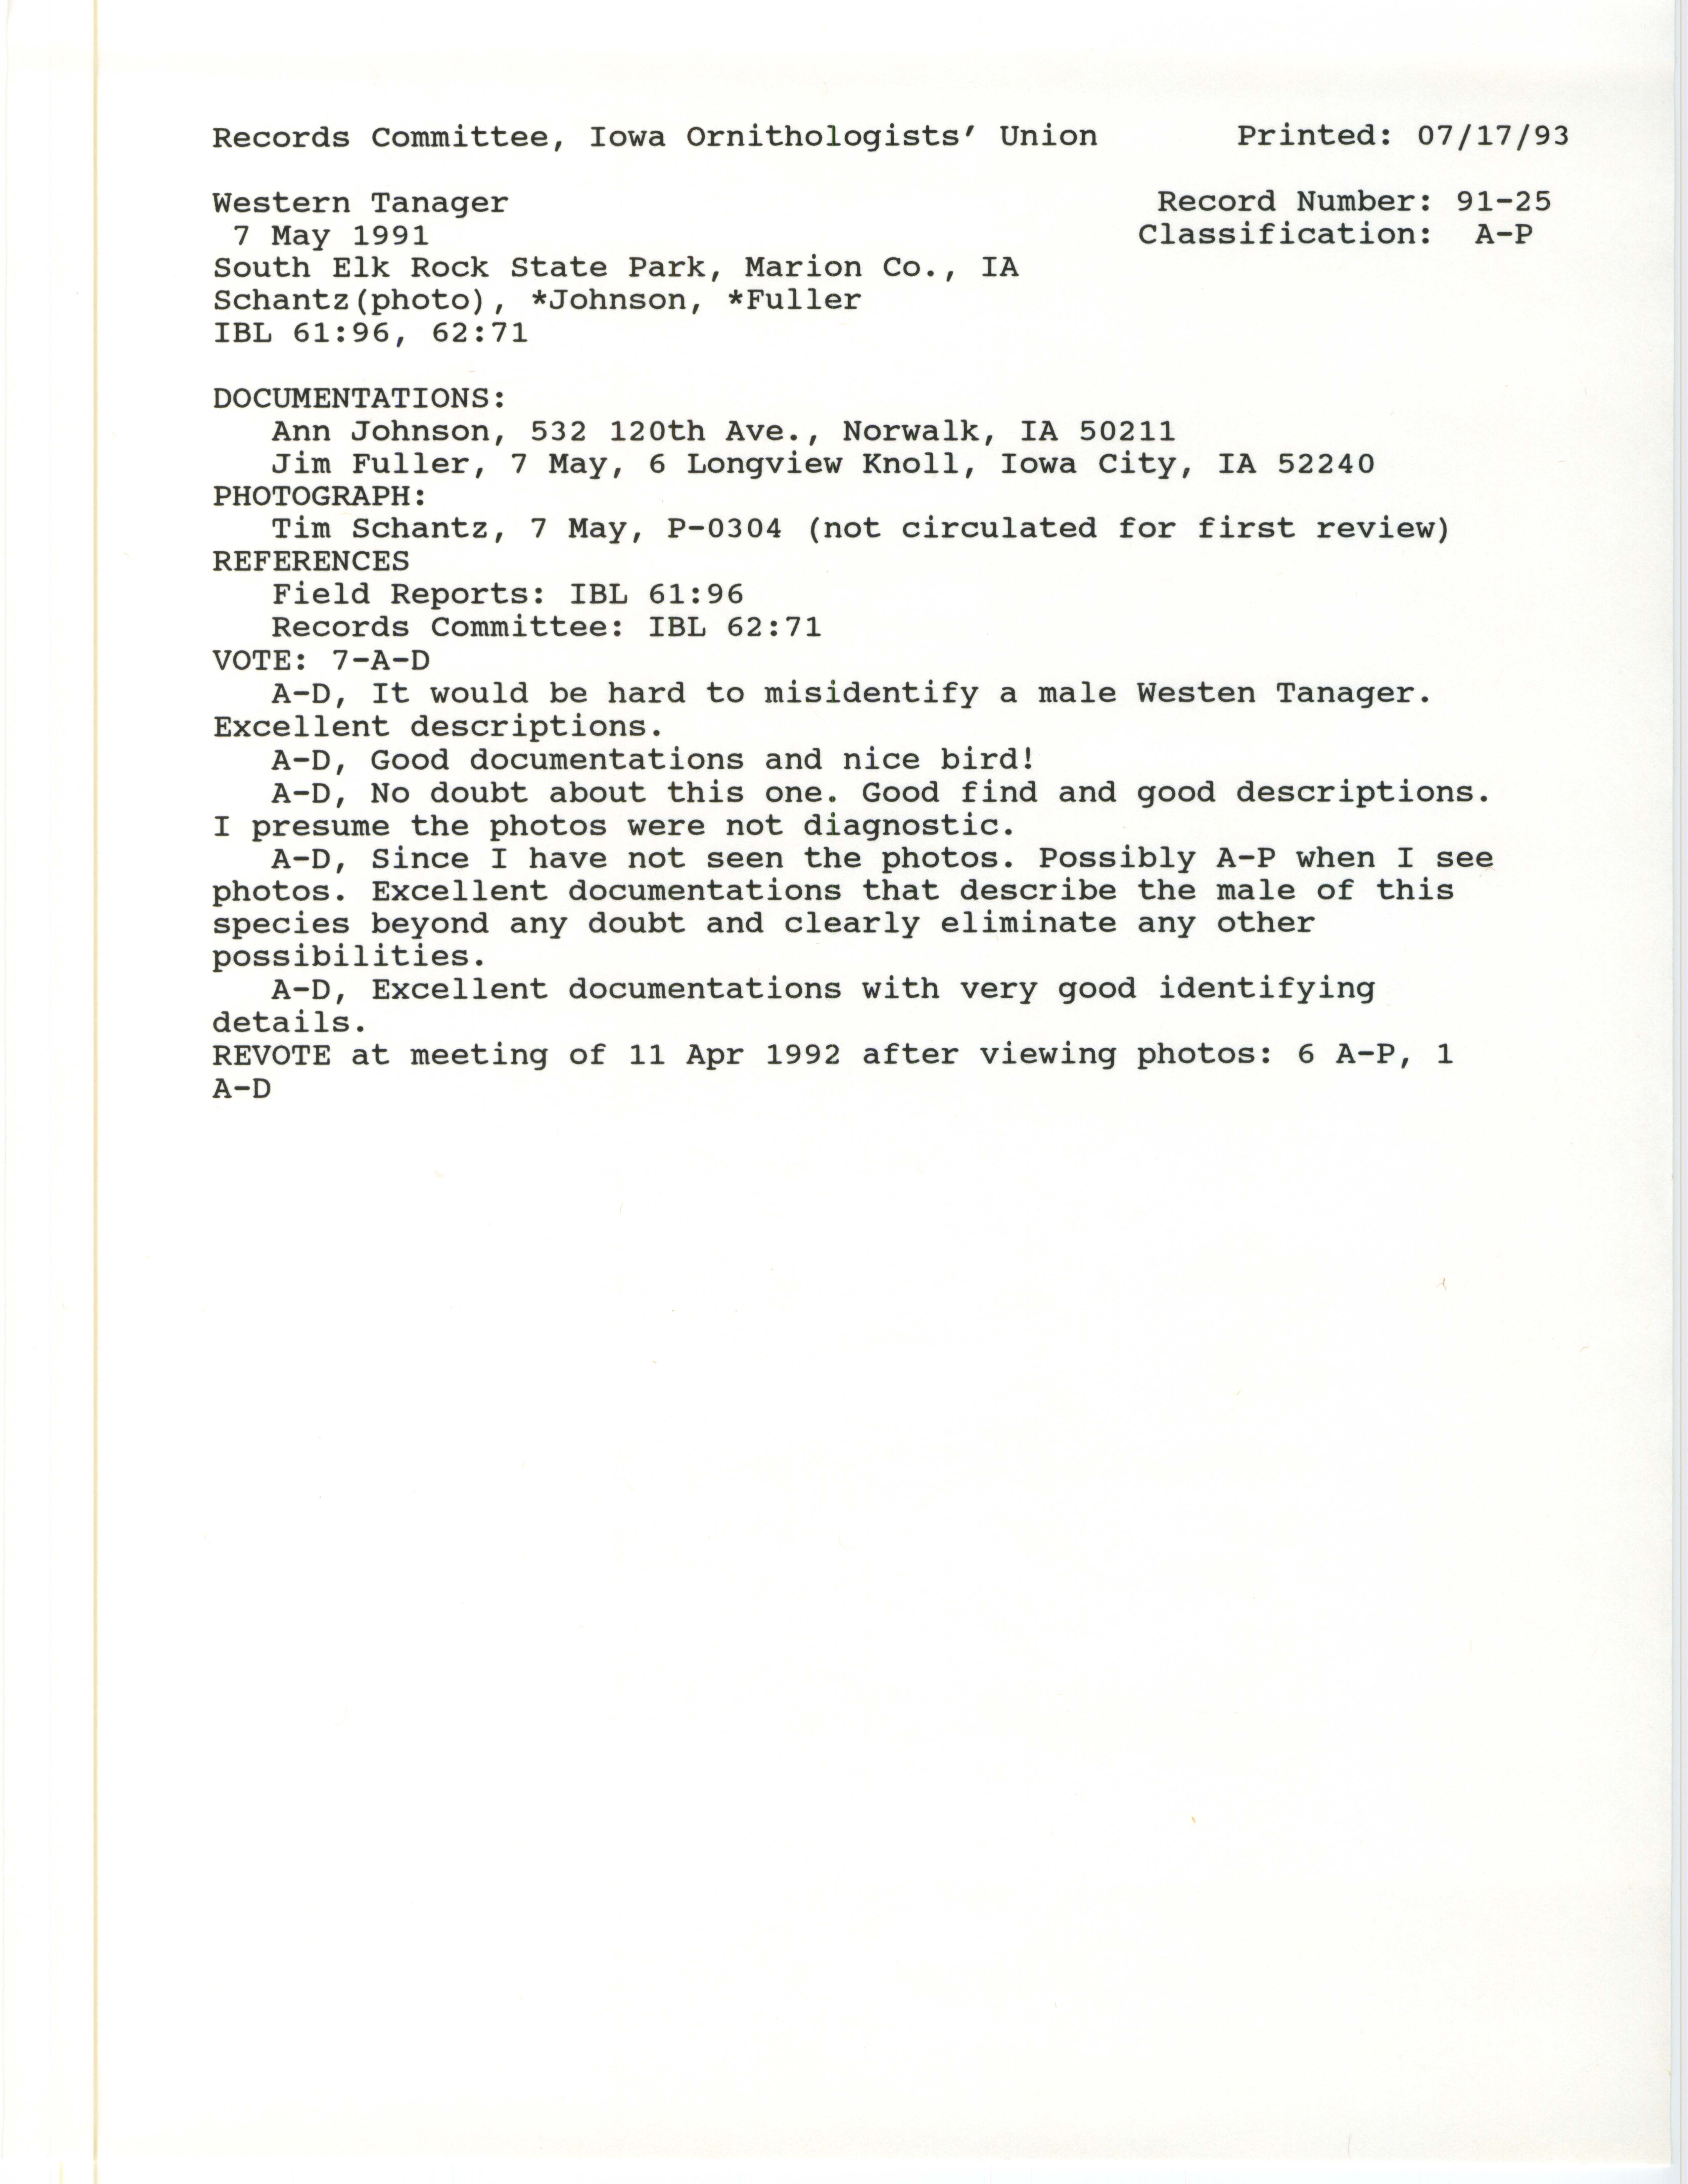 Records Committee review for rare bird sighting for Western Tanager at Elk Rock State Park, 1991